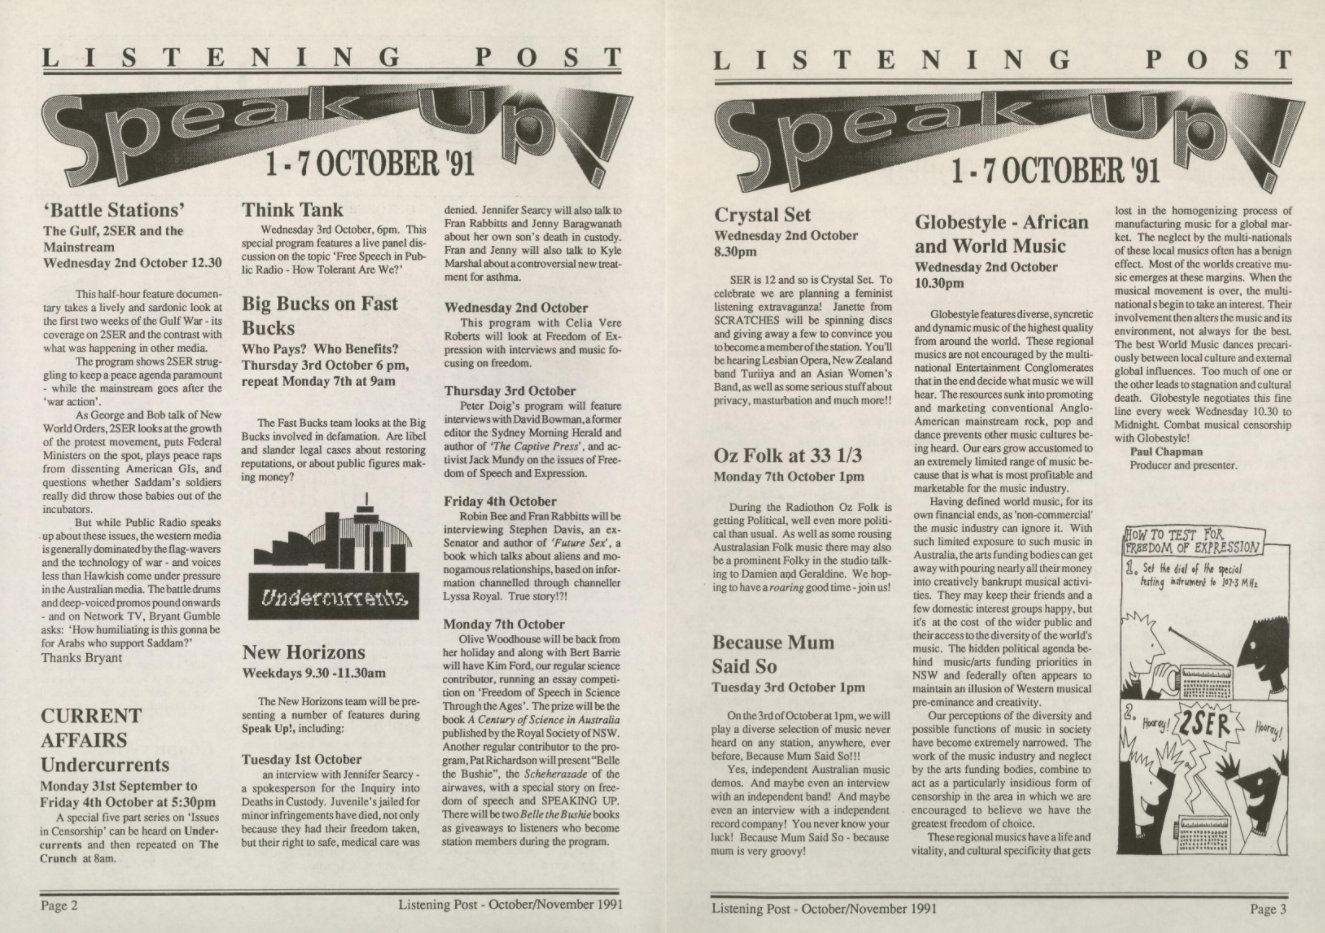 Pages from Listening Post magazine